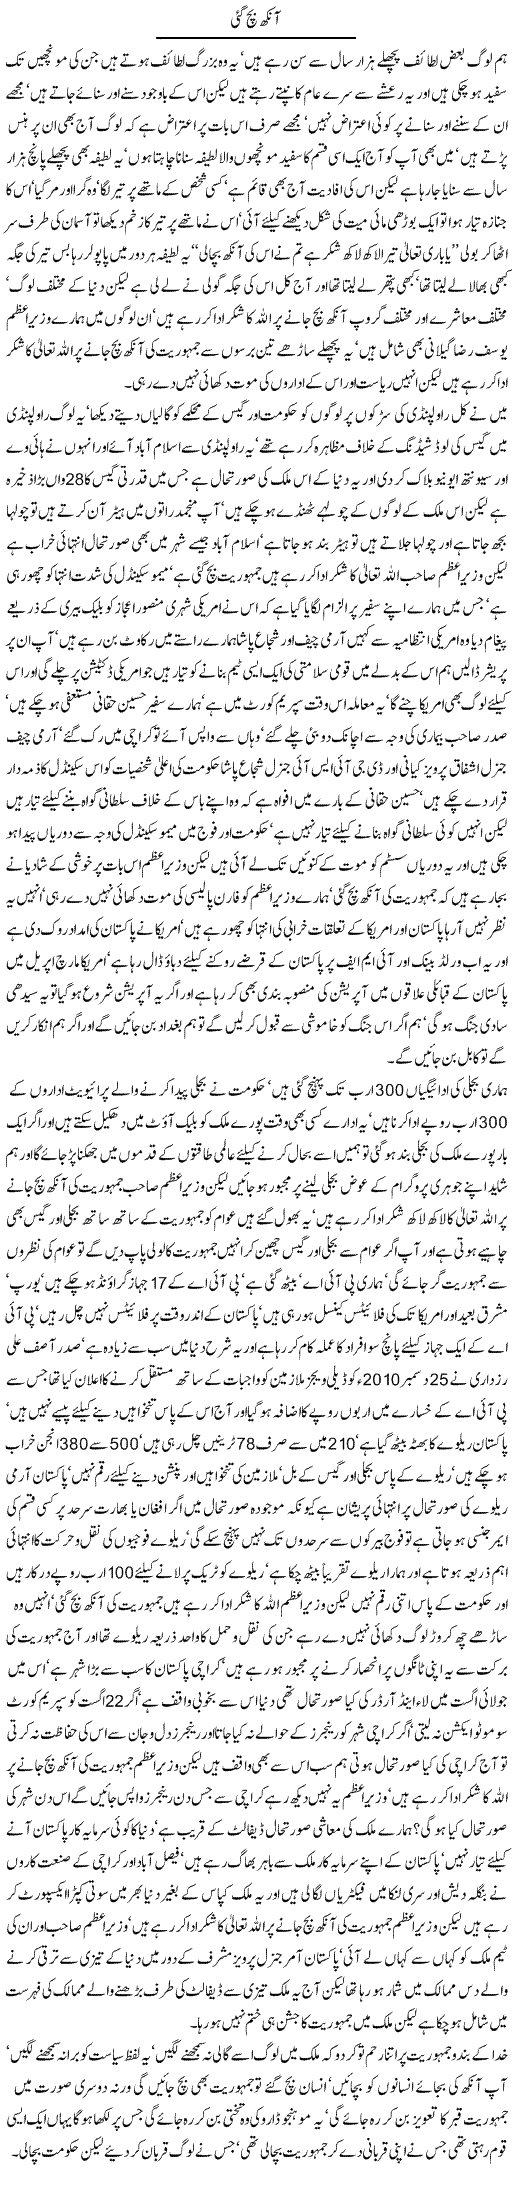 Present Government Express Column Javed Chaudhry 20 December 2011